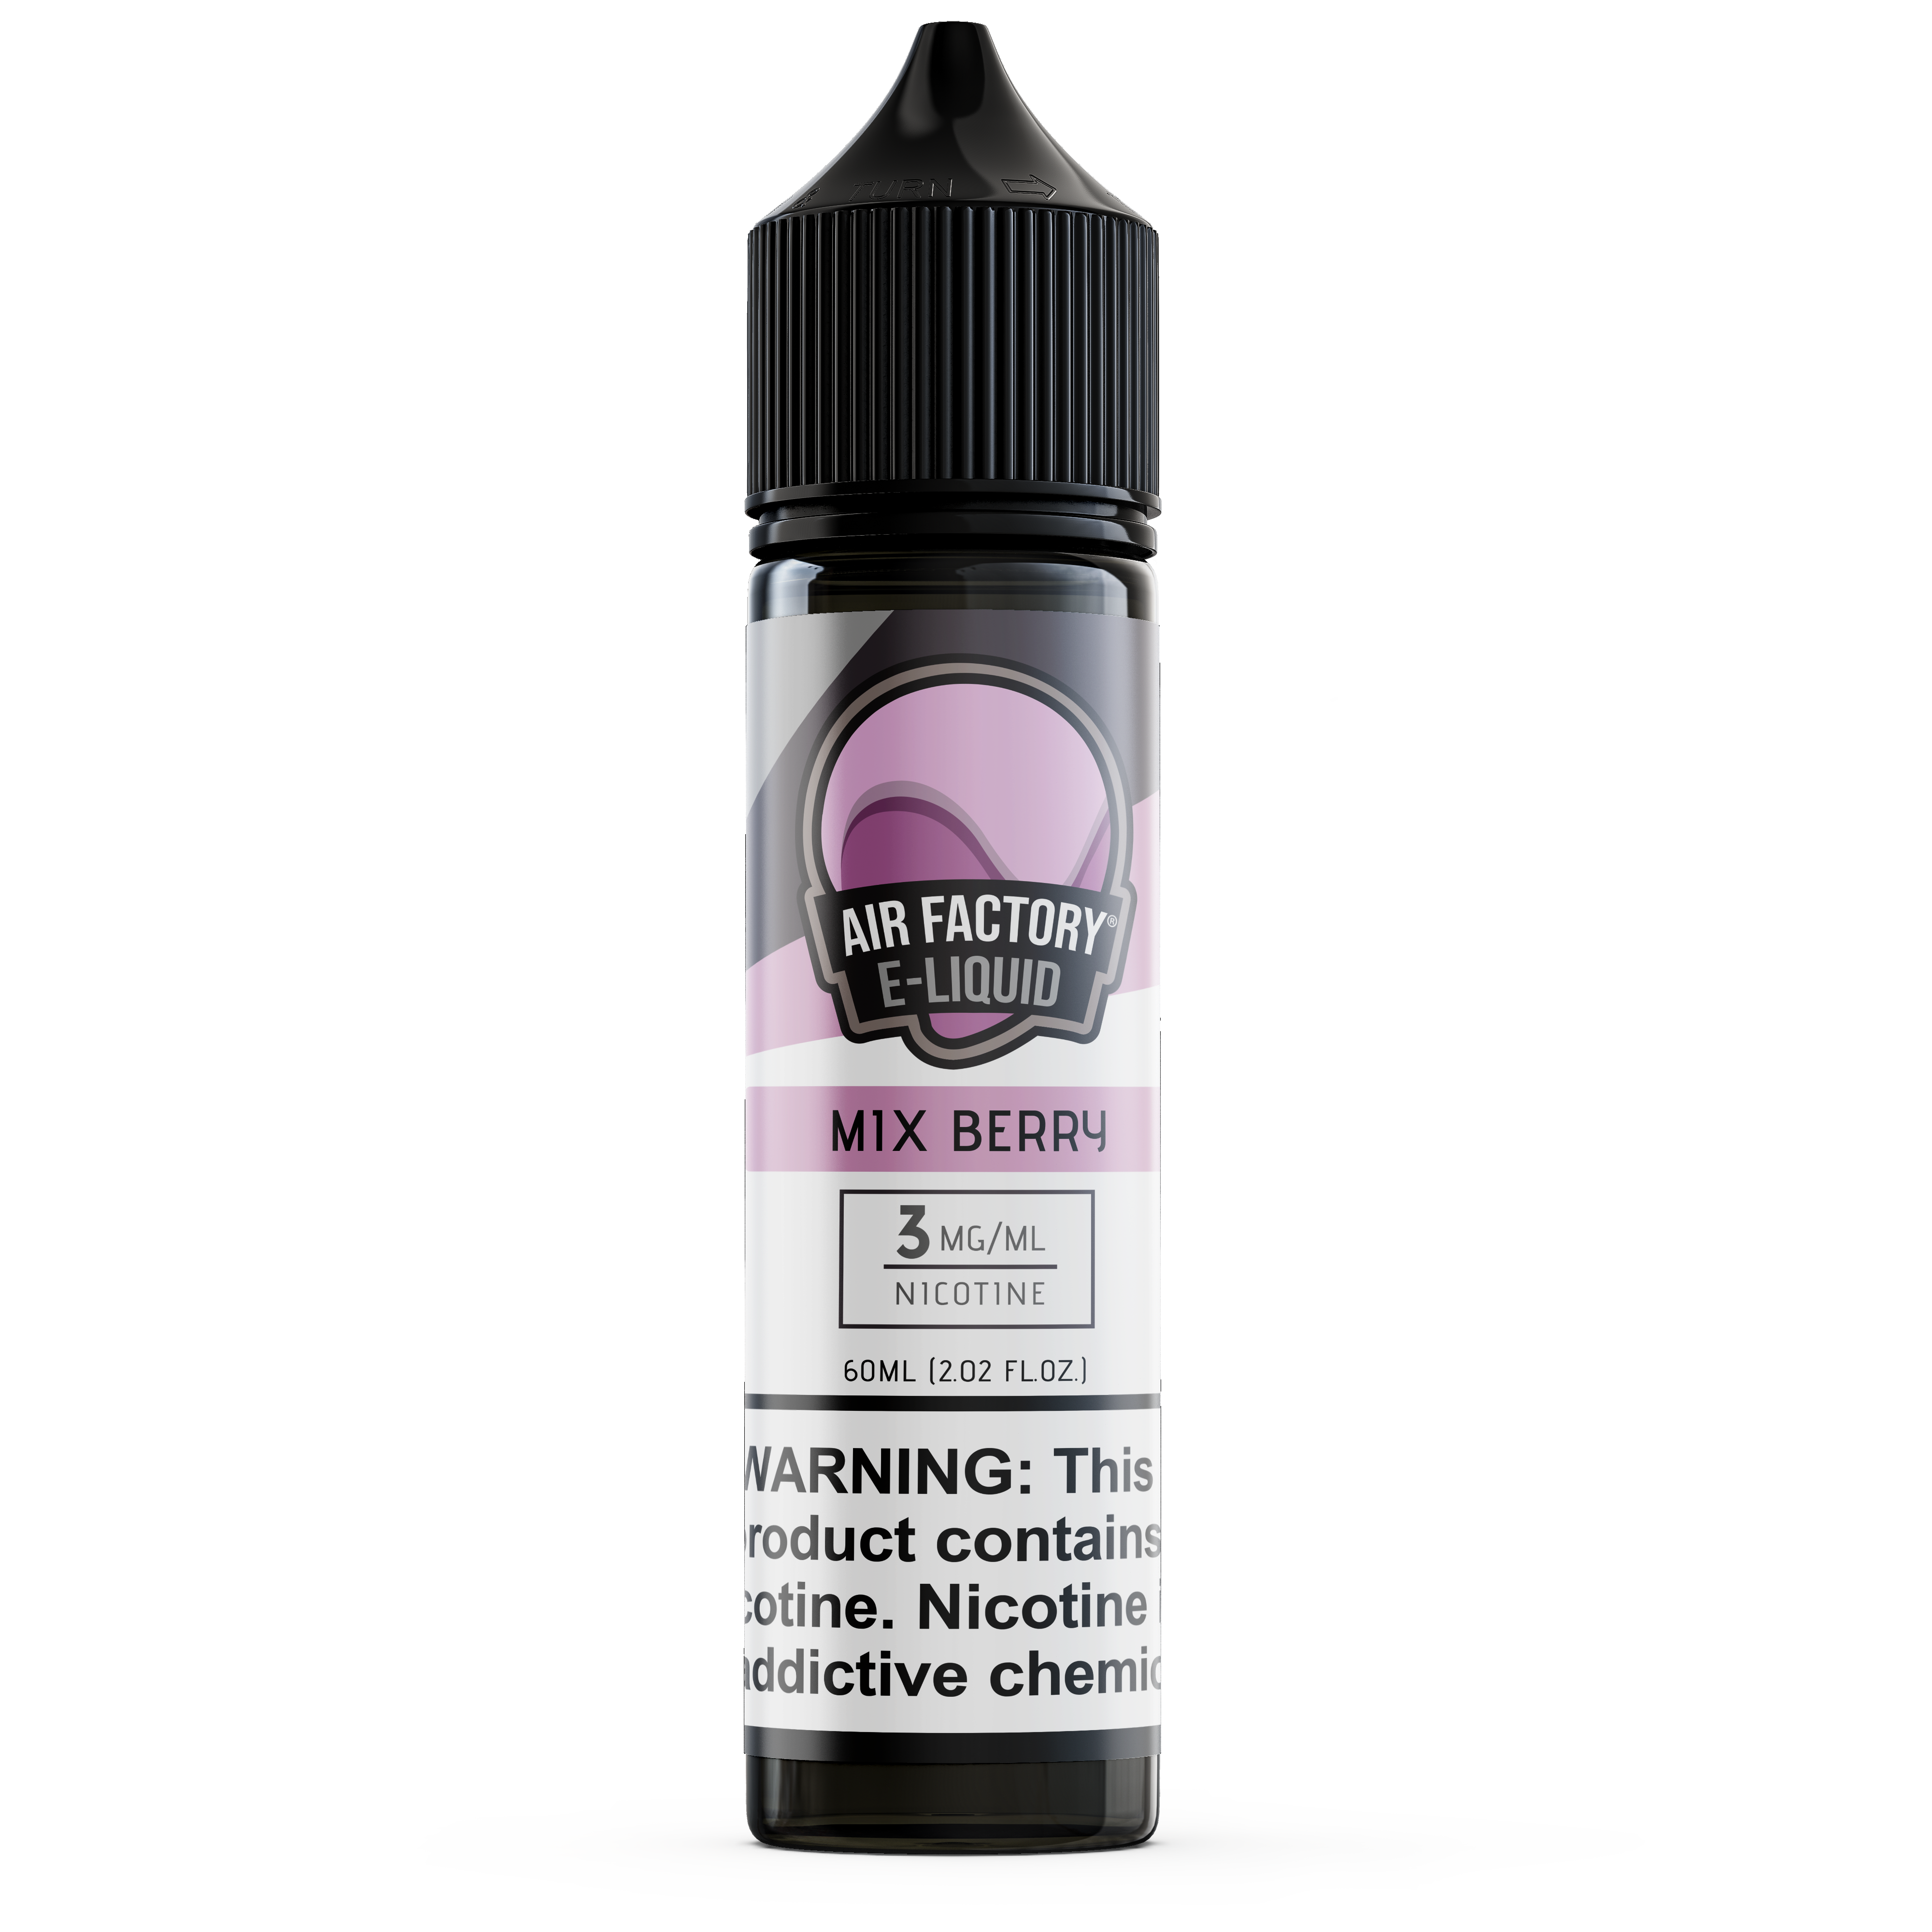 Mix Berry by Air Factory E-Juice 60mL Bottle